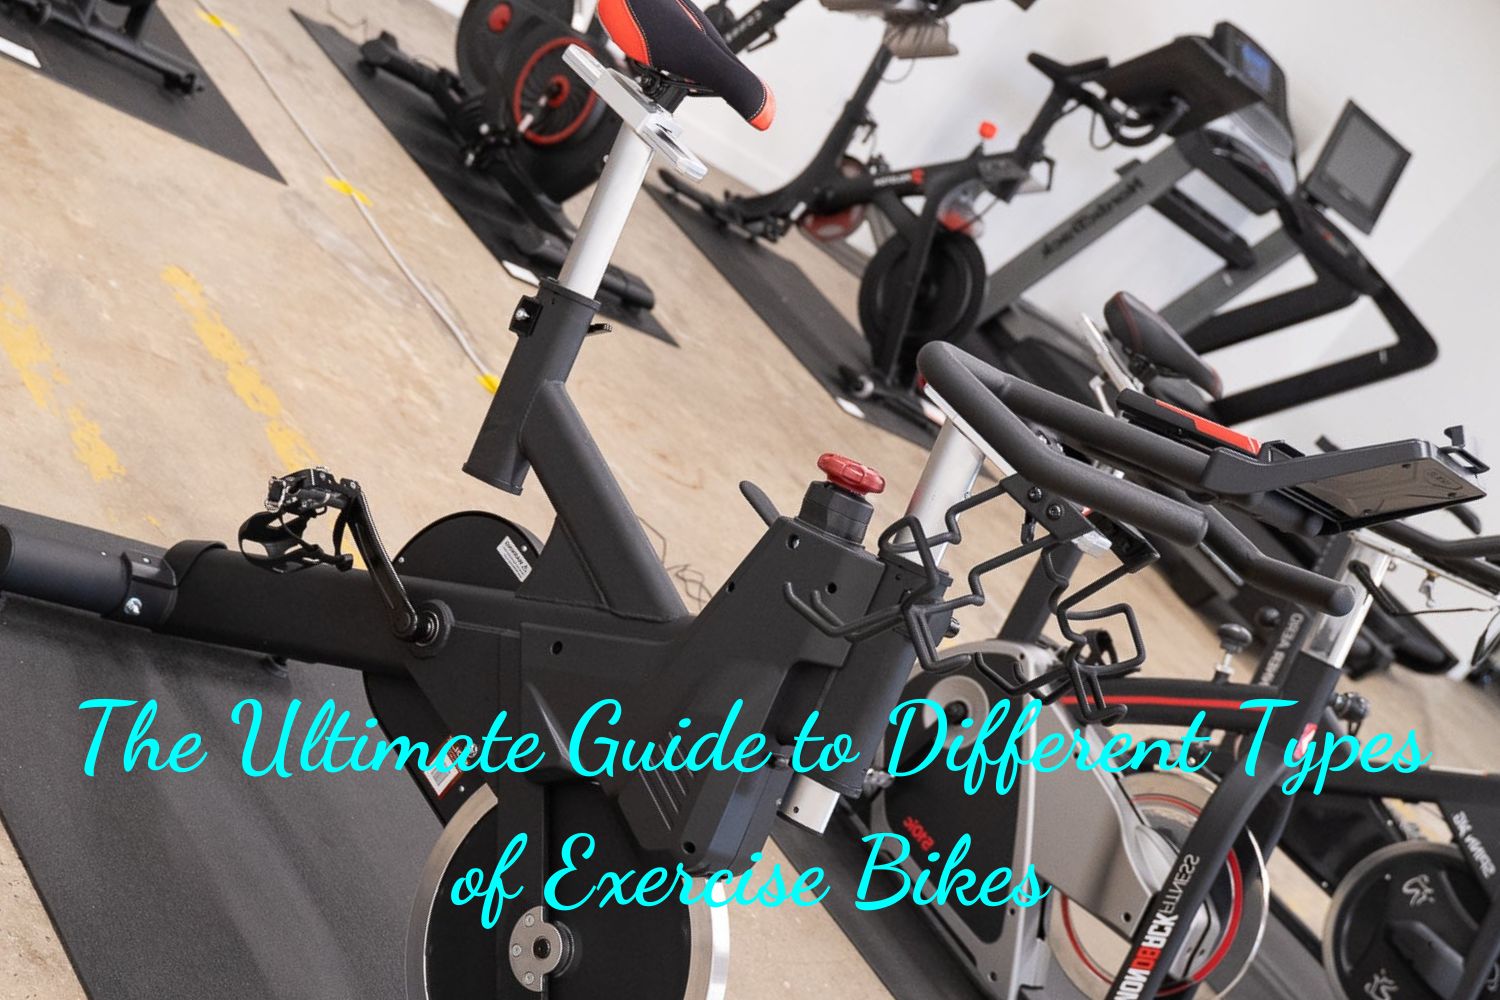 The Ultimate Guide to Different Types of Exercise Bikes